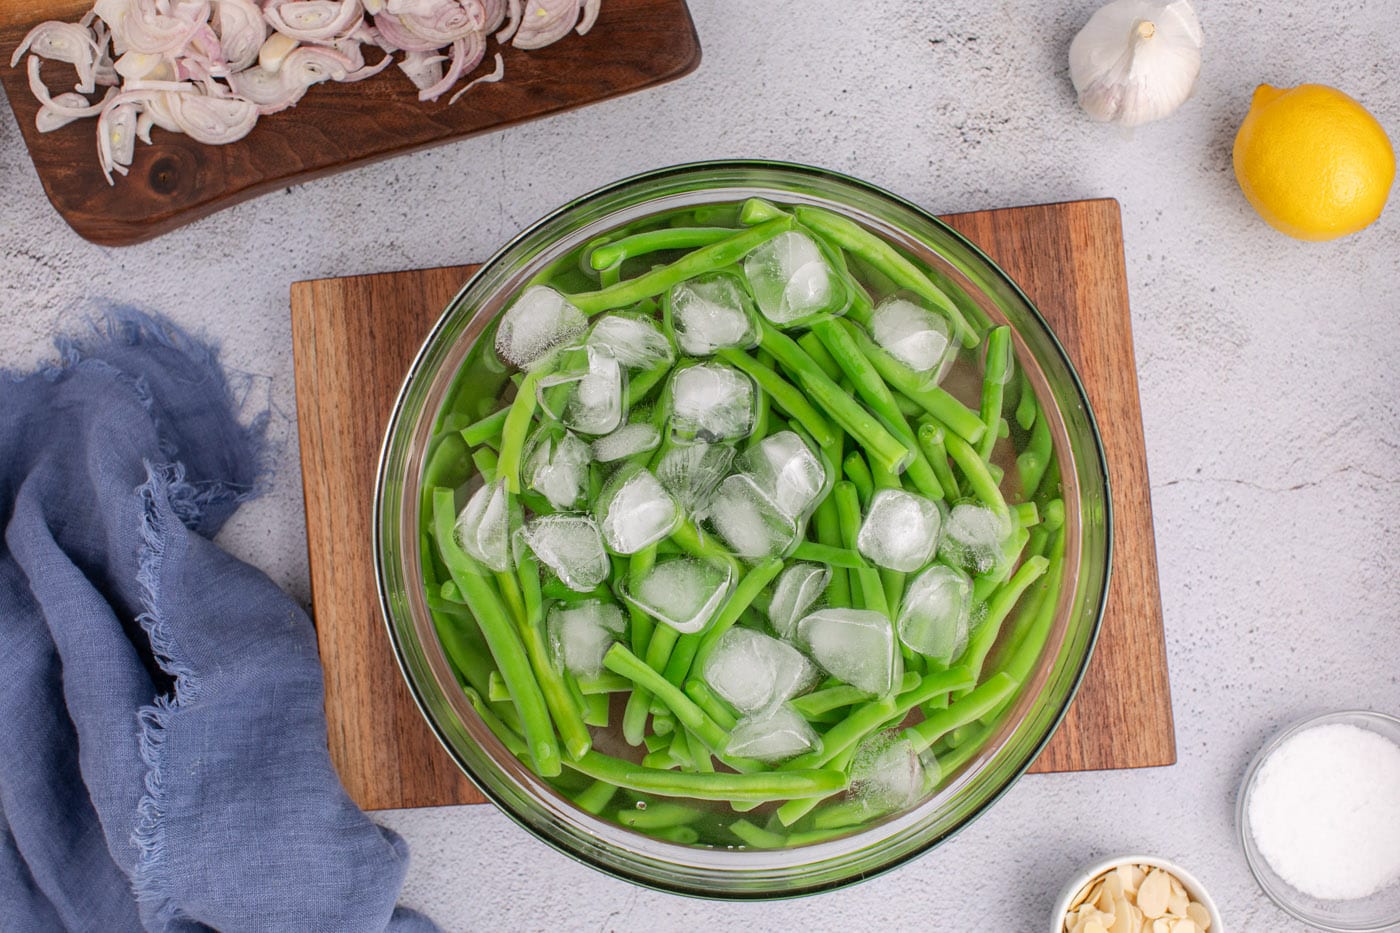 blanching green beans in an ice bath